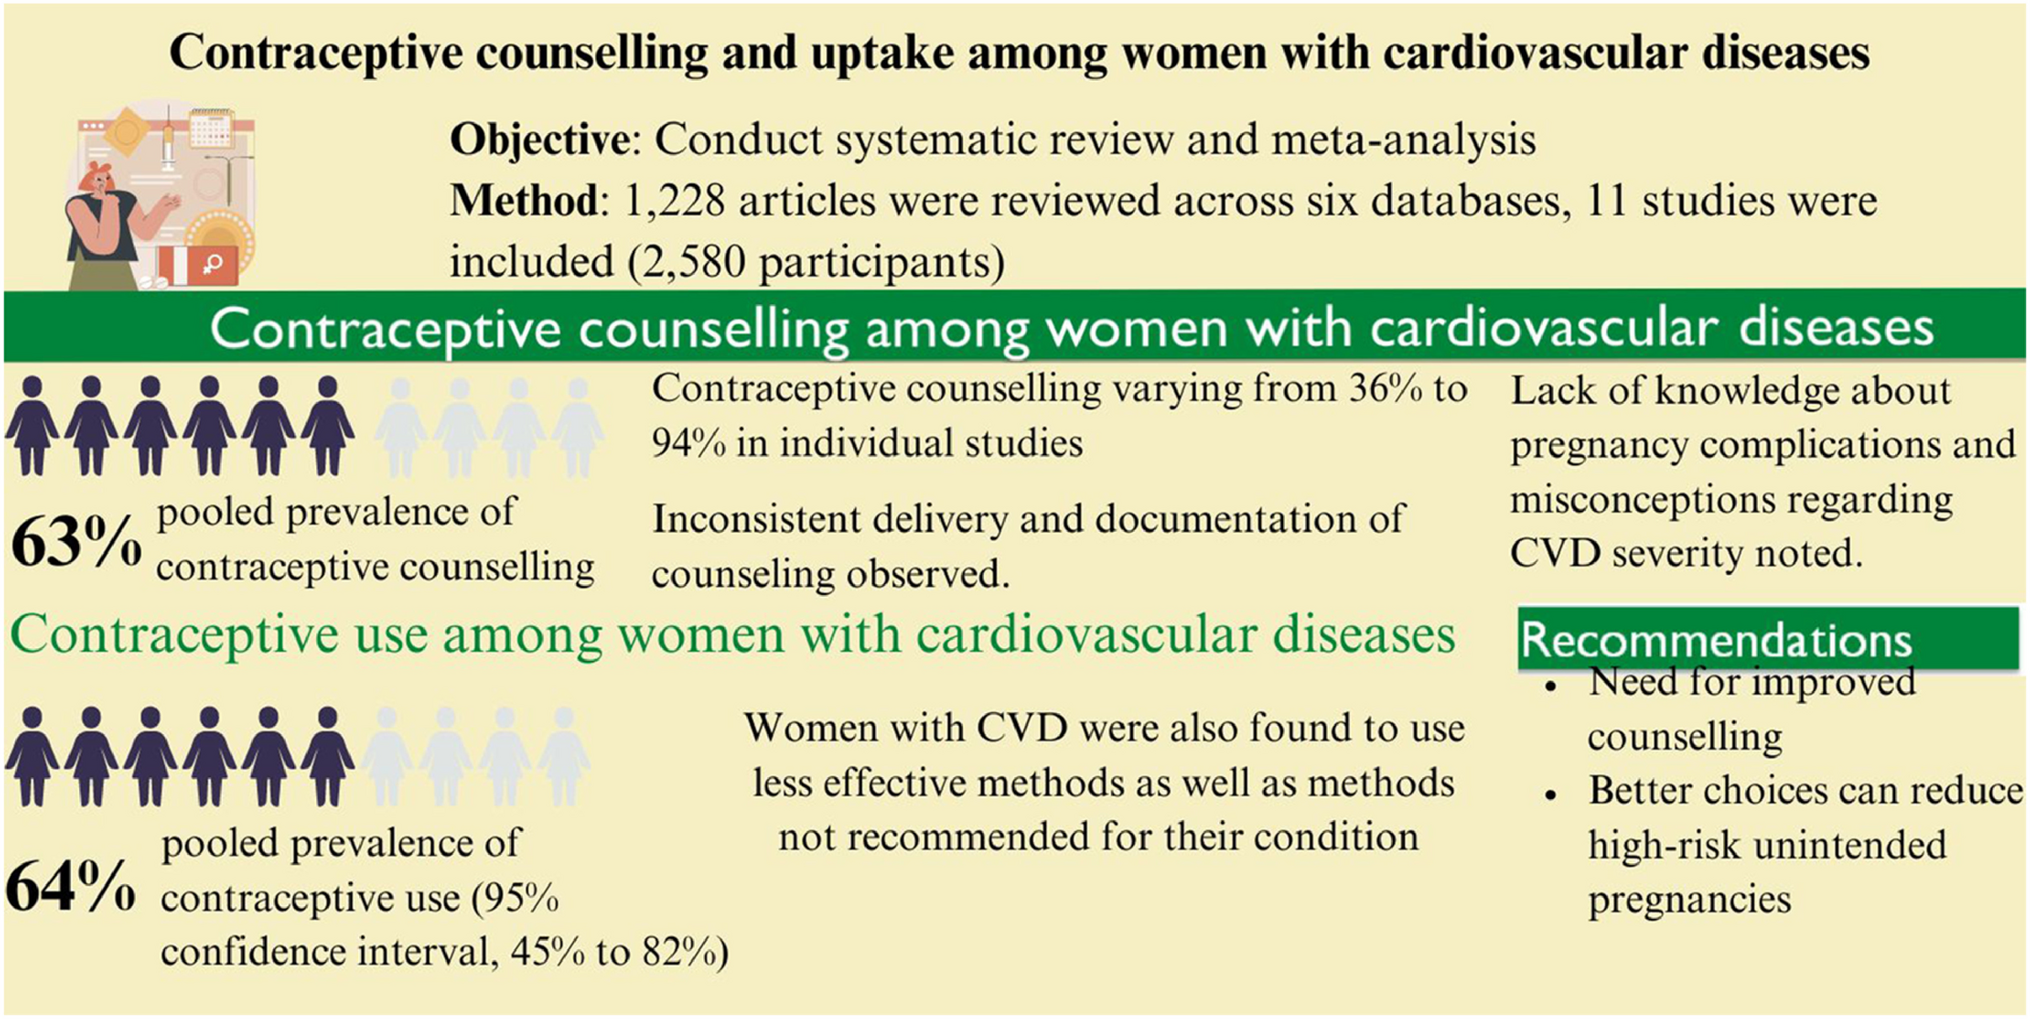 Contraceptive counselling and uptake of contraception among women with cardiovascular diseases: a systematic review and meta-analysis